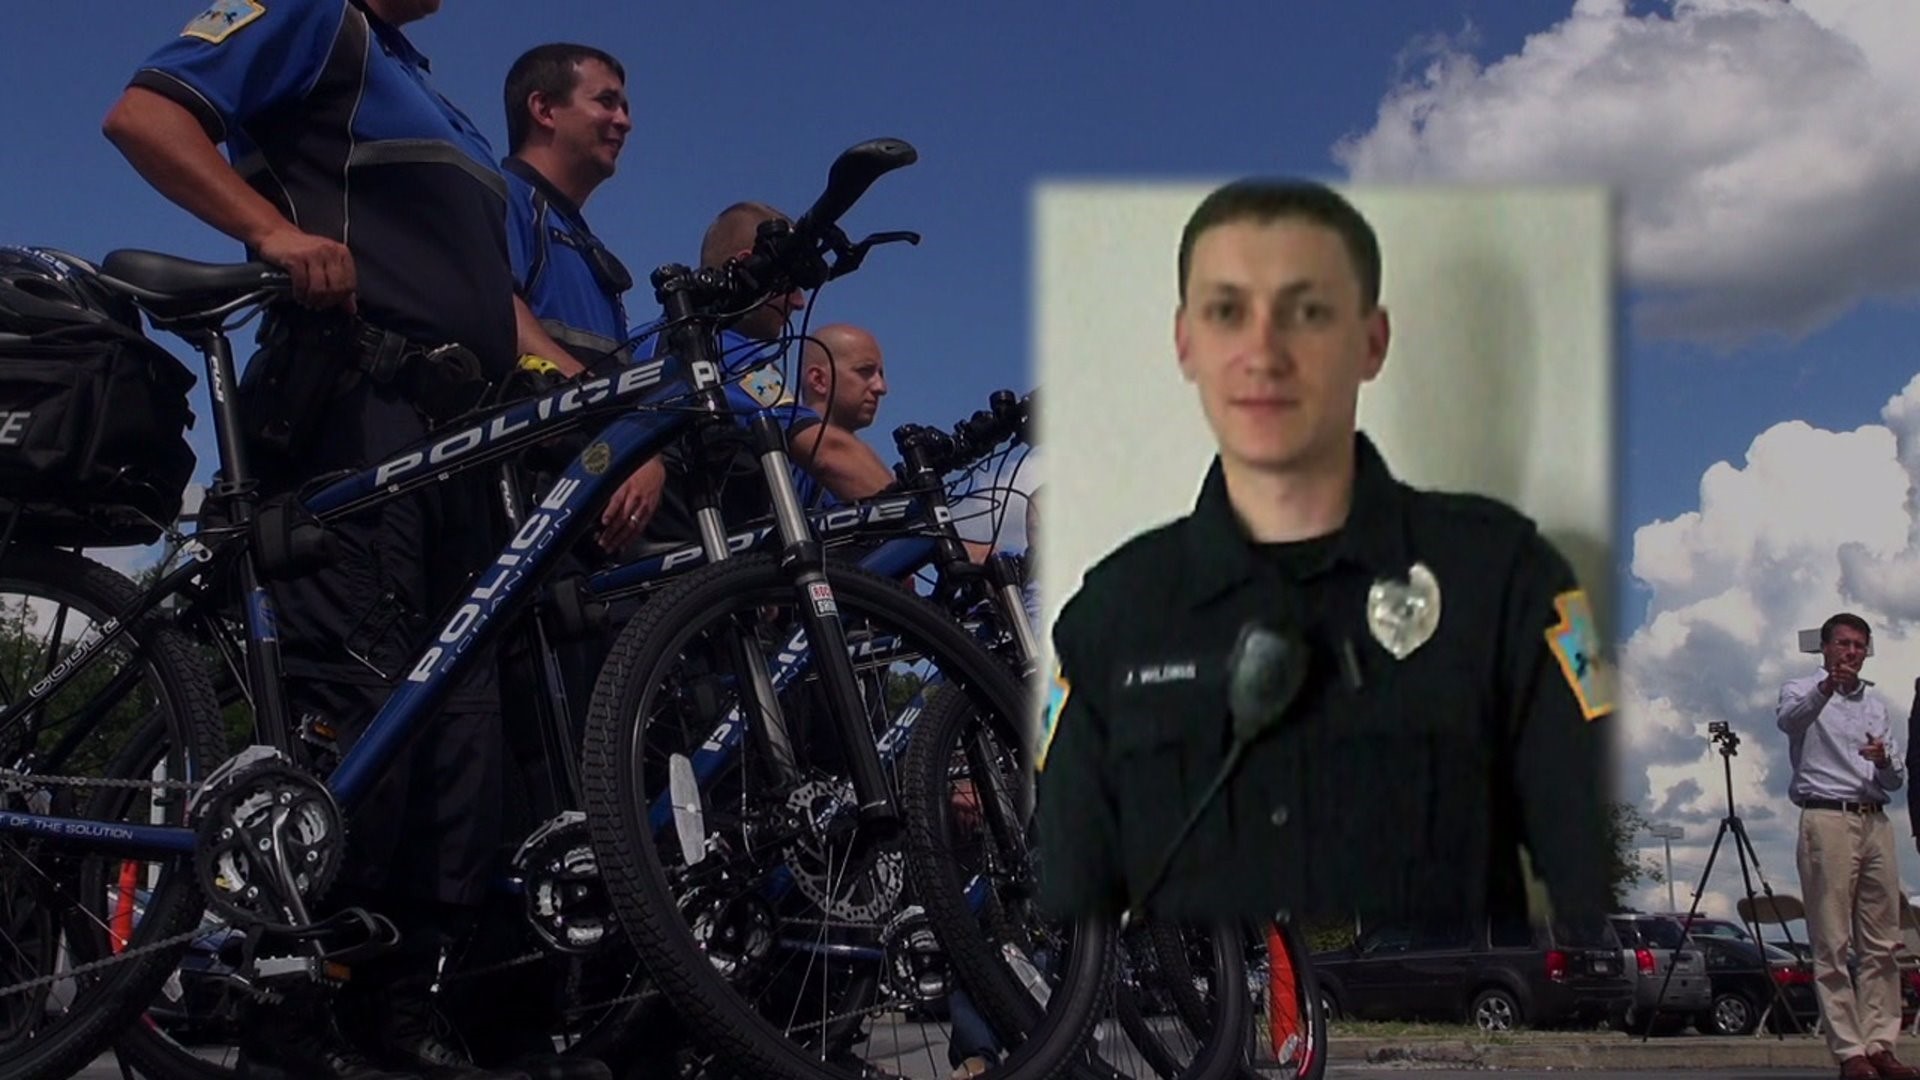 Police Dept. Receives New Bikes to Honor Fallen Officer